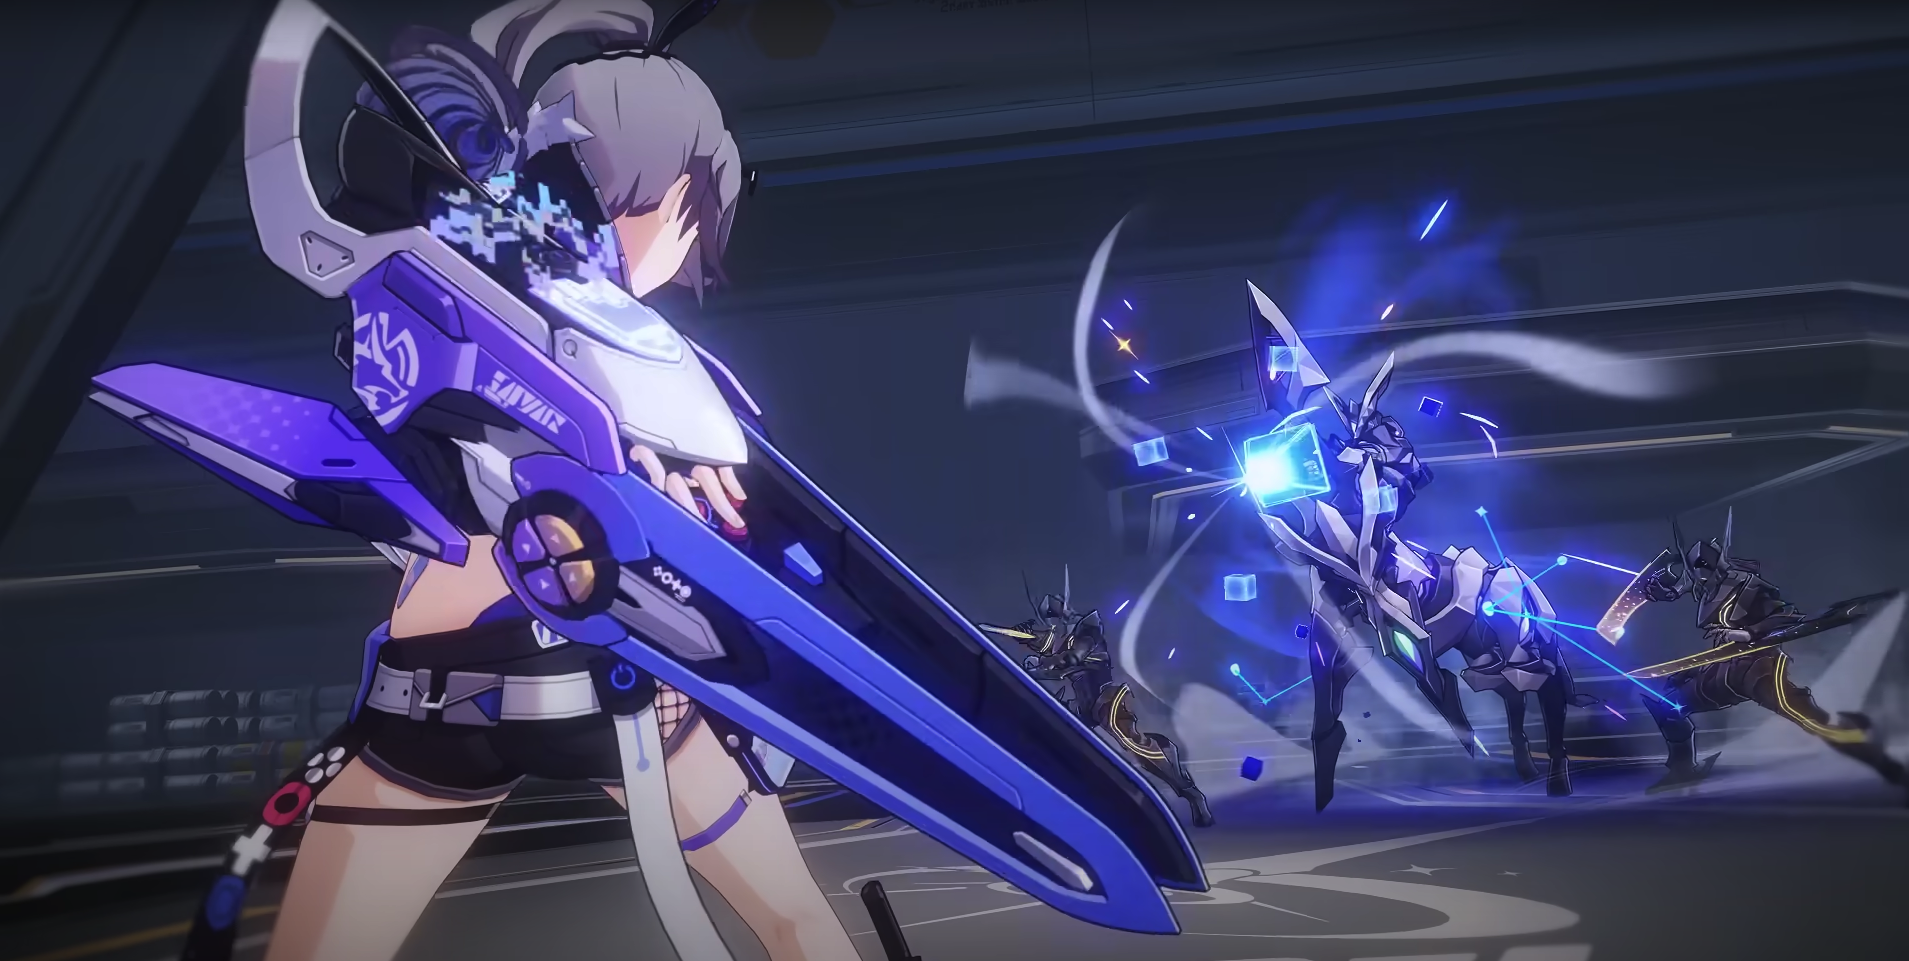 PS4: Will Honkai Star Rail version 1.1 be available on the PS4?